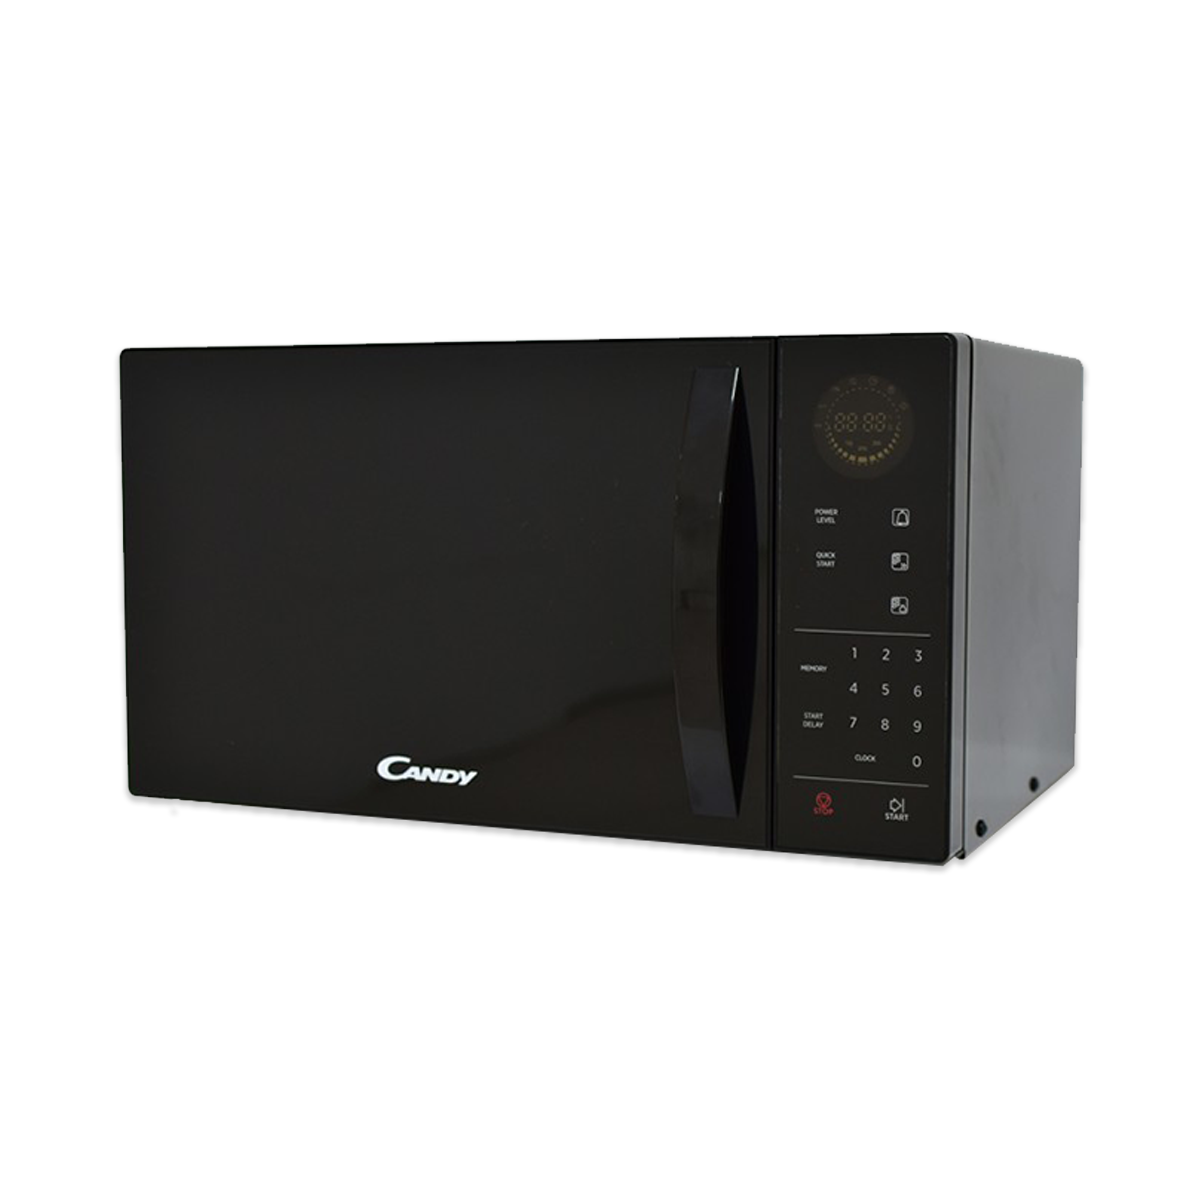  Free Standing Microwave 25L (CMW25STB-19)